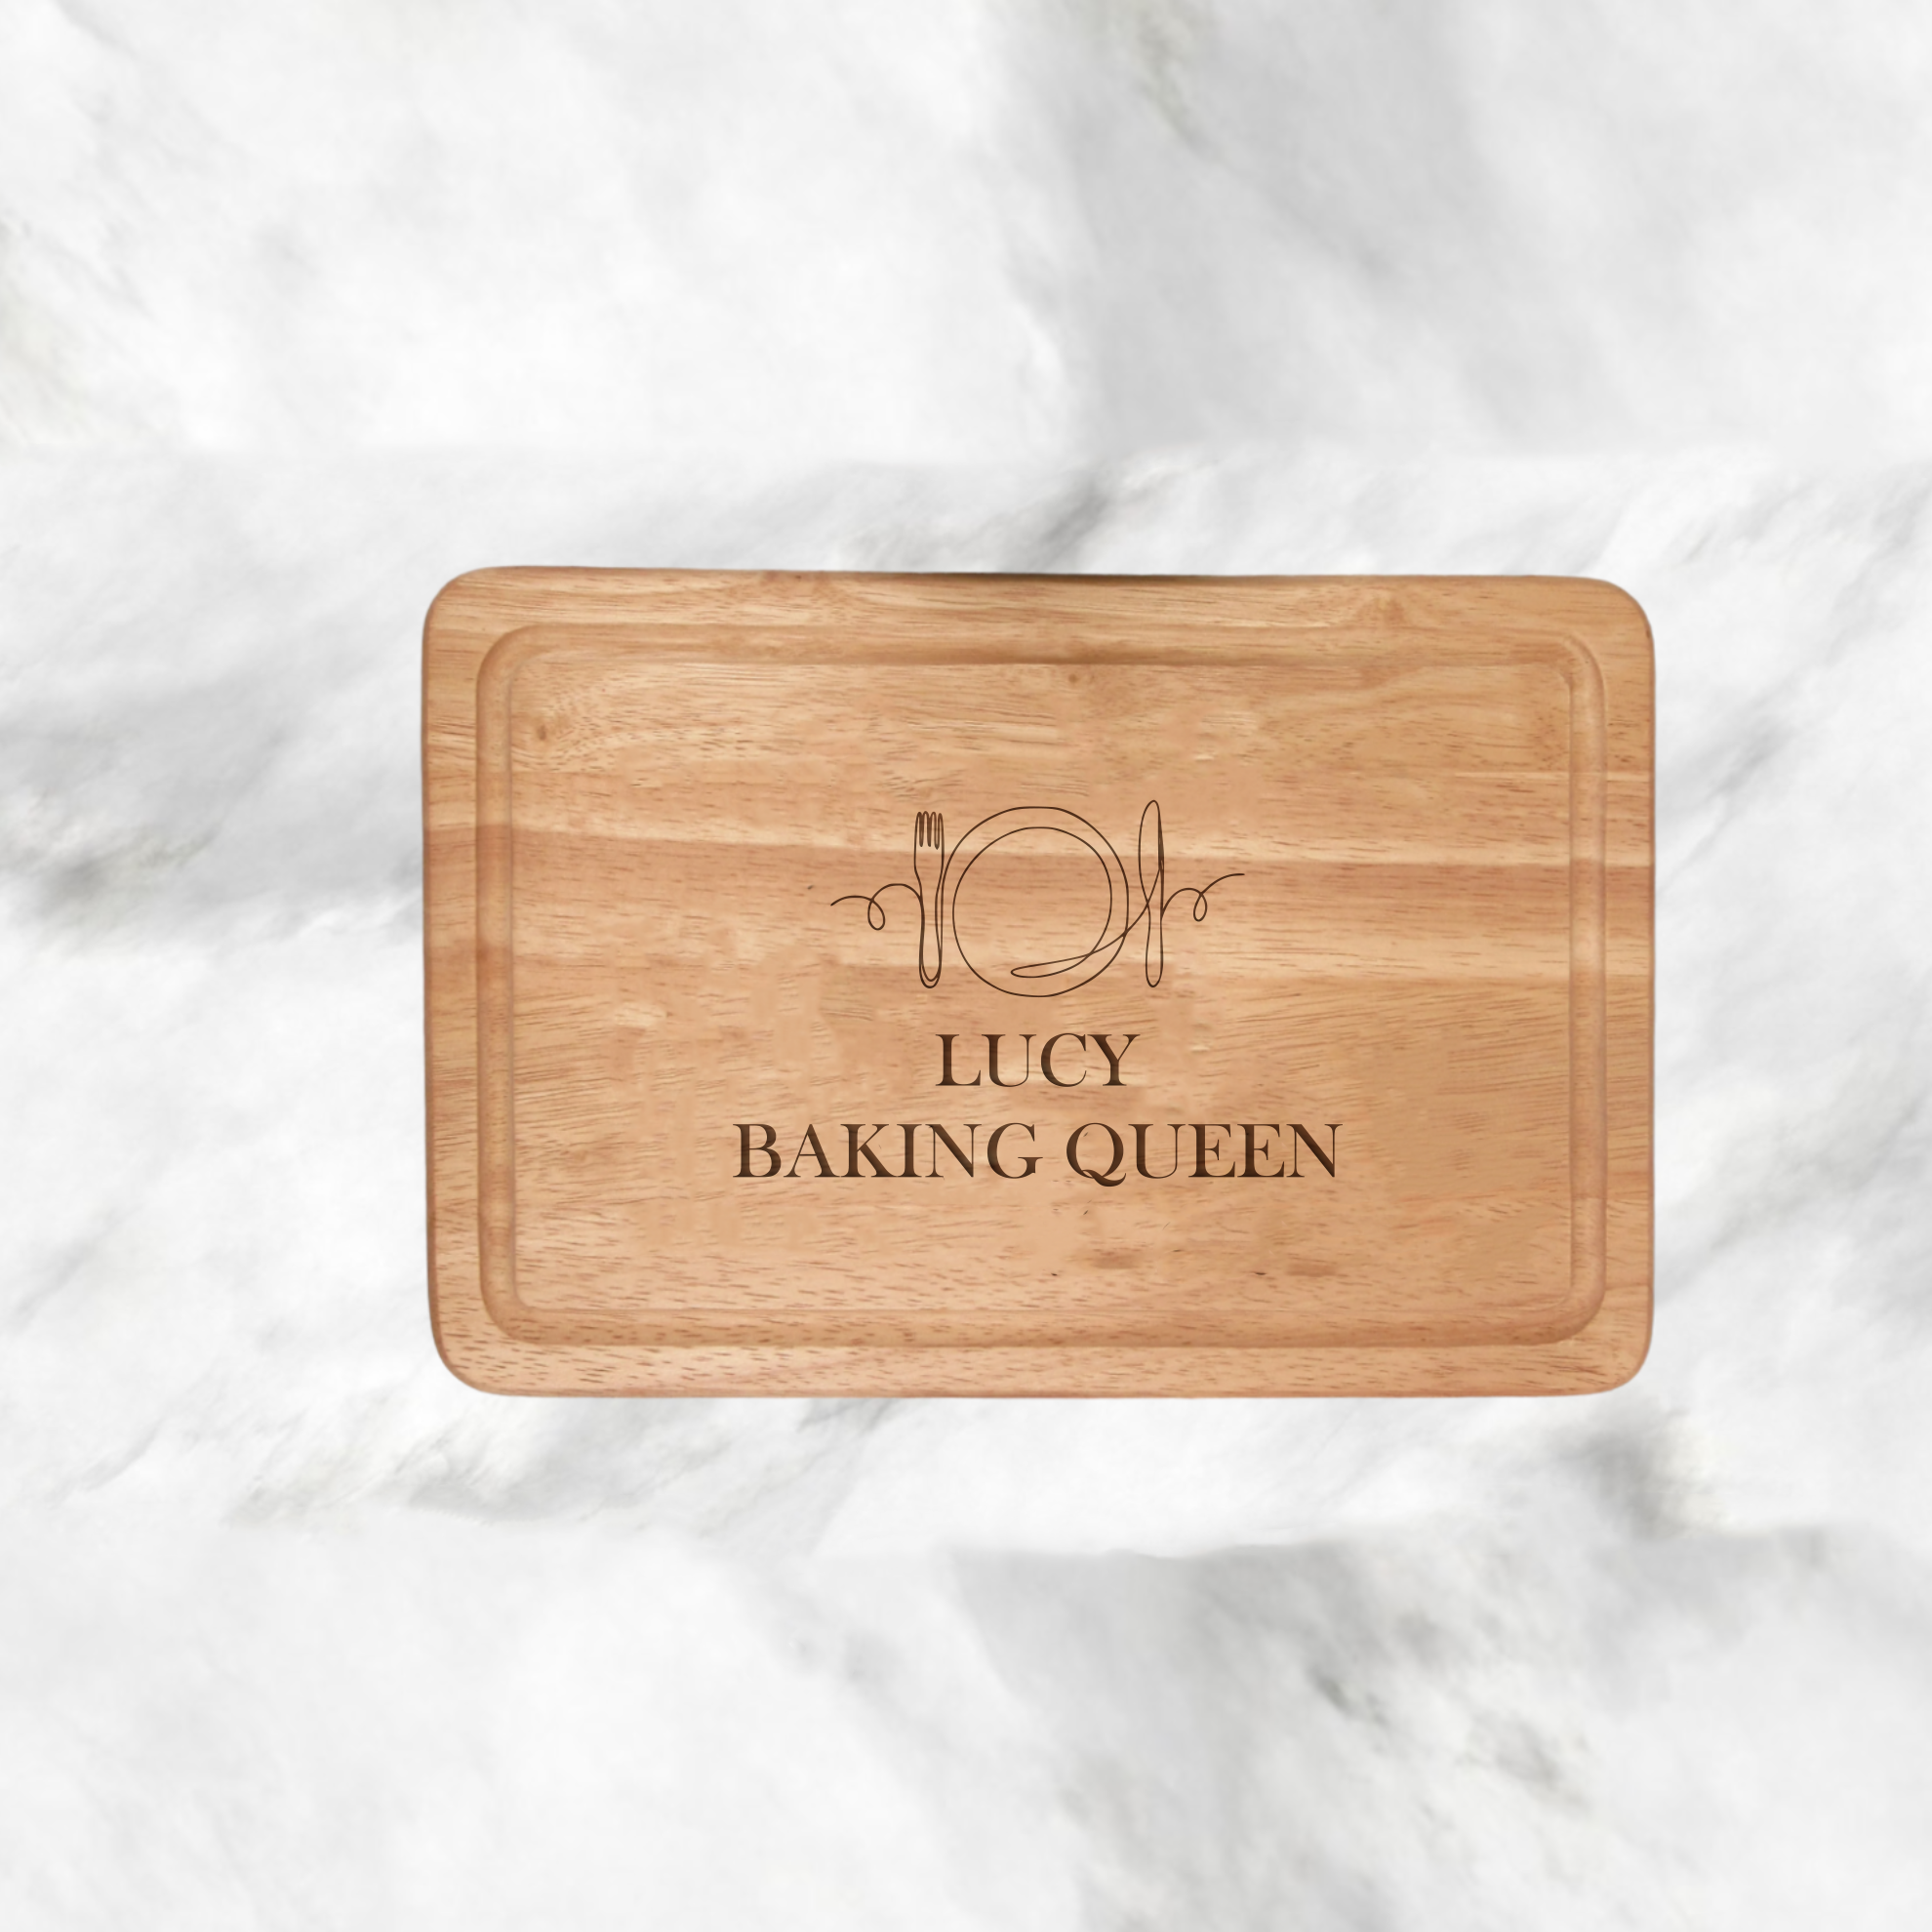 Elevate your kitchen with our Personalised Chopping Board Knife & Fork Design. Engrave 2 lines of text (max 20 characters each in caps) on this 300mmX200mm premium wood board. Ideal for housewarmings, weddings, or anniversaries, it adds beauty and individuality to your cooking. Versatile for day-to-day and special occasions, enjoy a truly special culinary experience with this stylish board. Care tip: Hand-wash only for lasting charm.